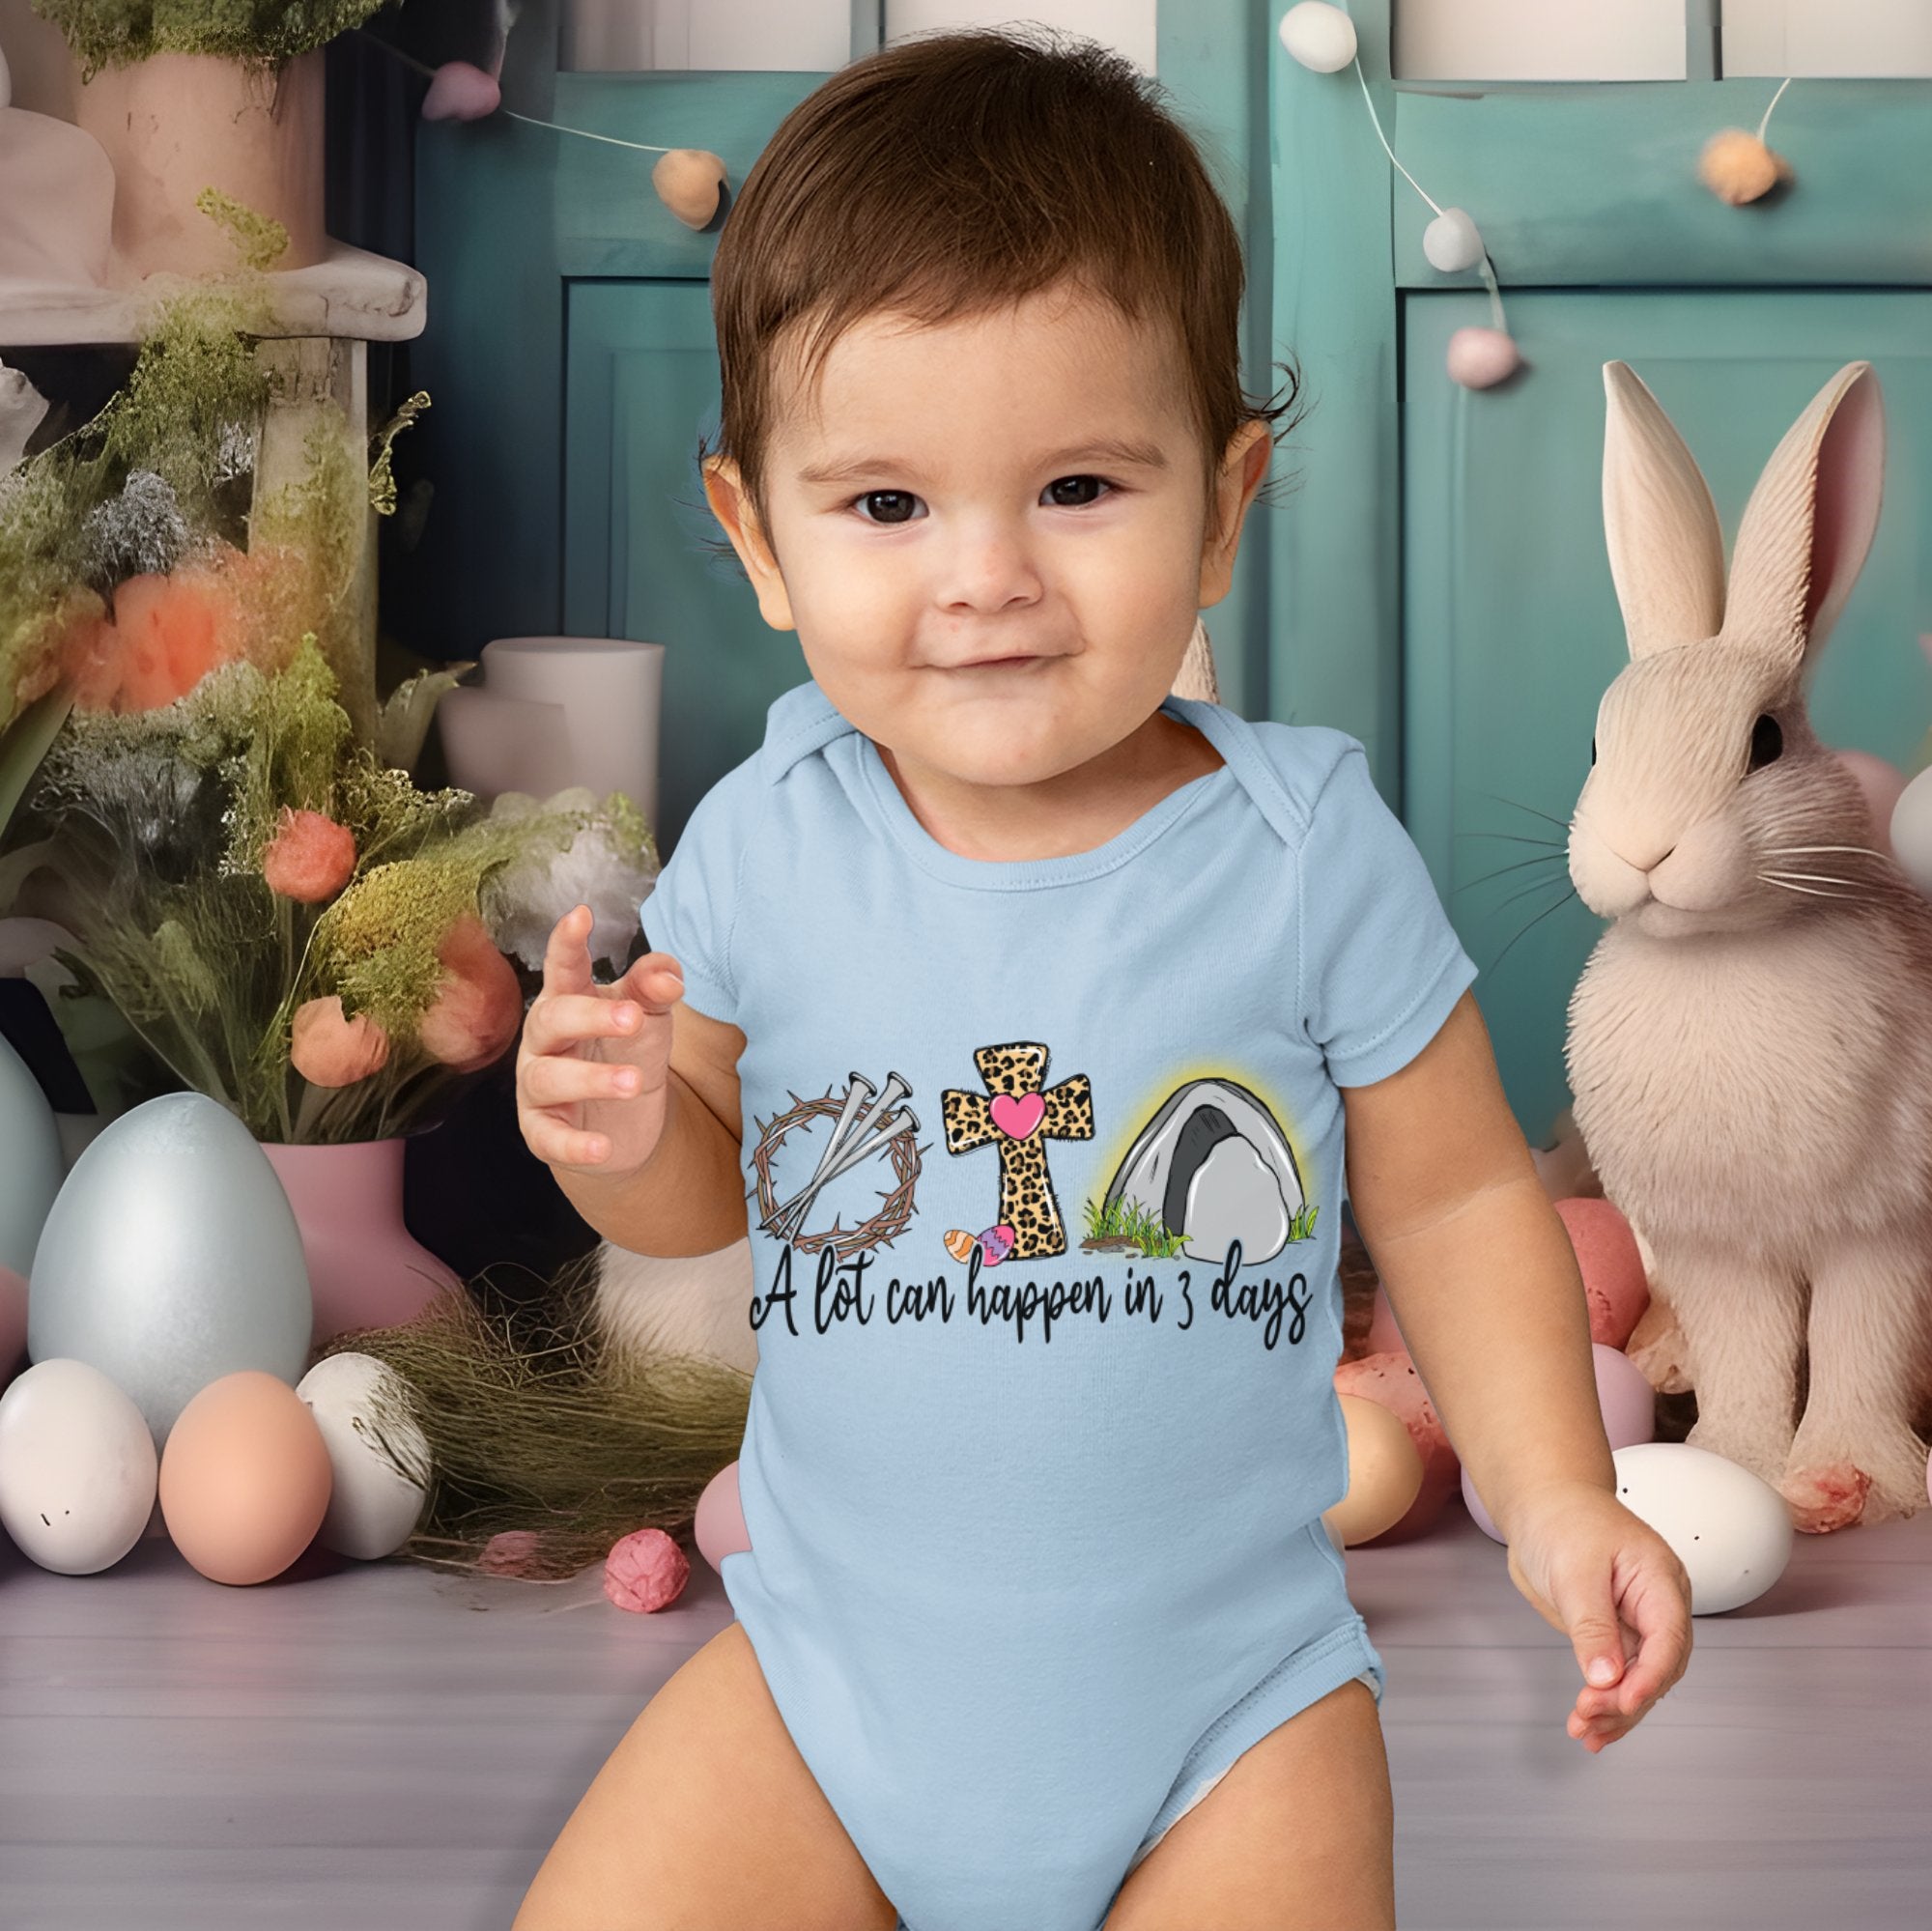 He is Risen Easter Infant Jersey Bodysuit, Christian Kids, Religious Gifts, Bible Verse Baby, He is Risen Easter, Cute Easter Baby Bodysuit Size: 6mo Color: White Jesus Passion Apparel